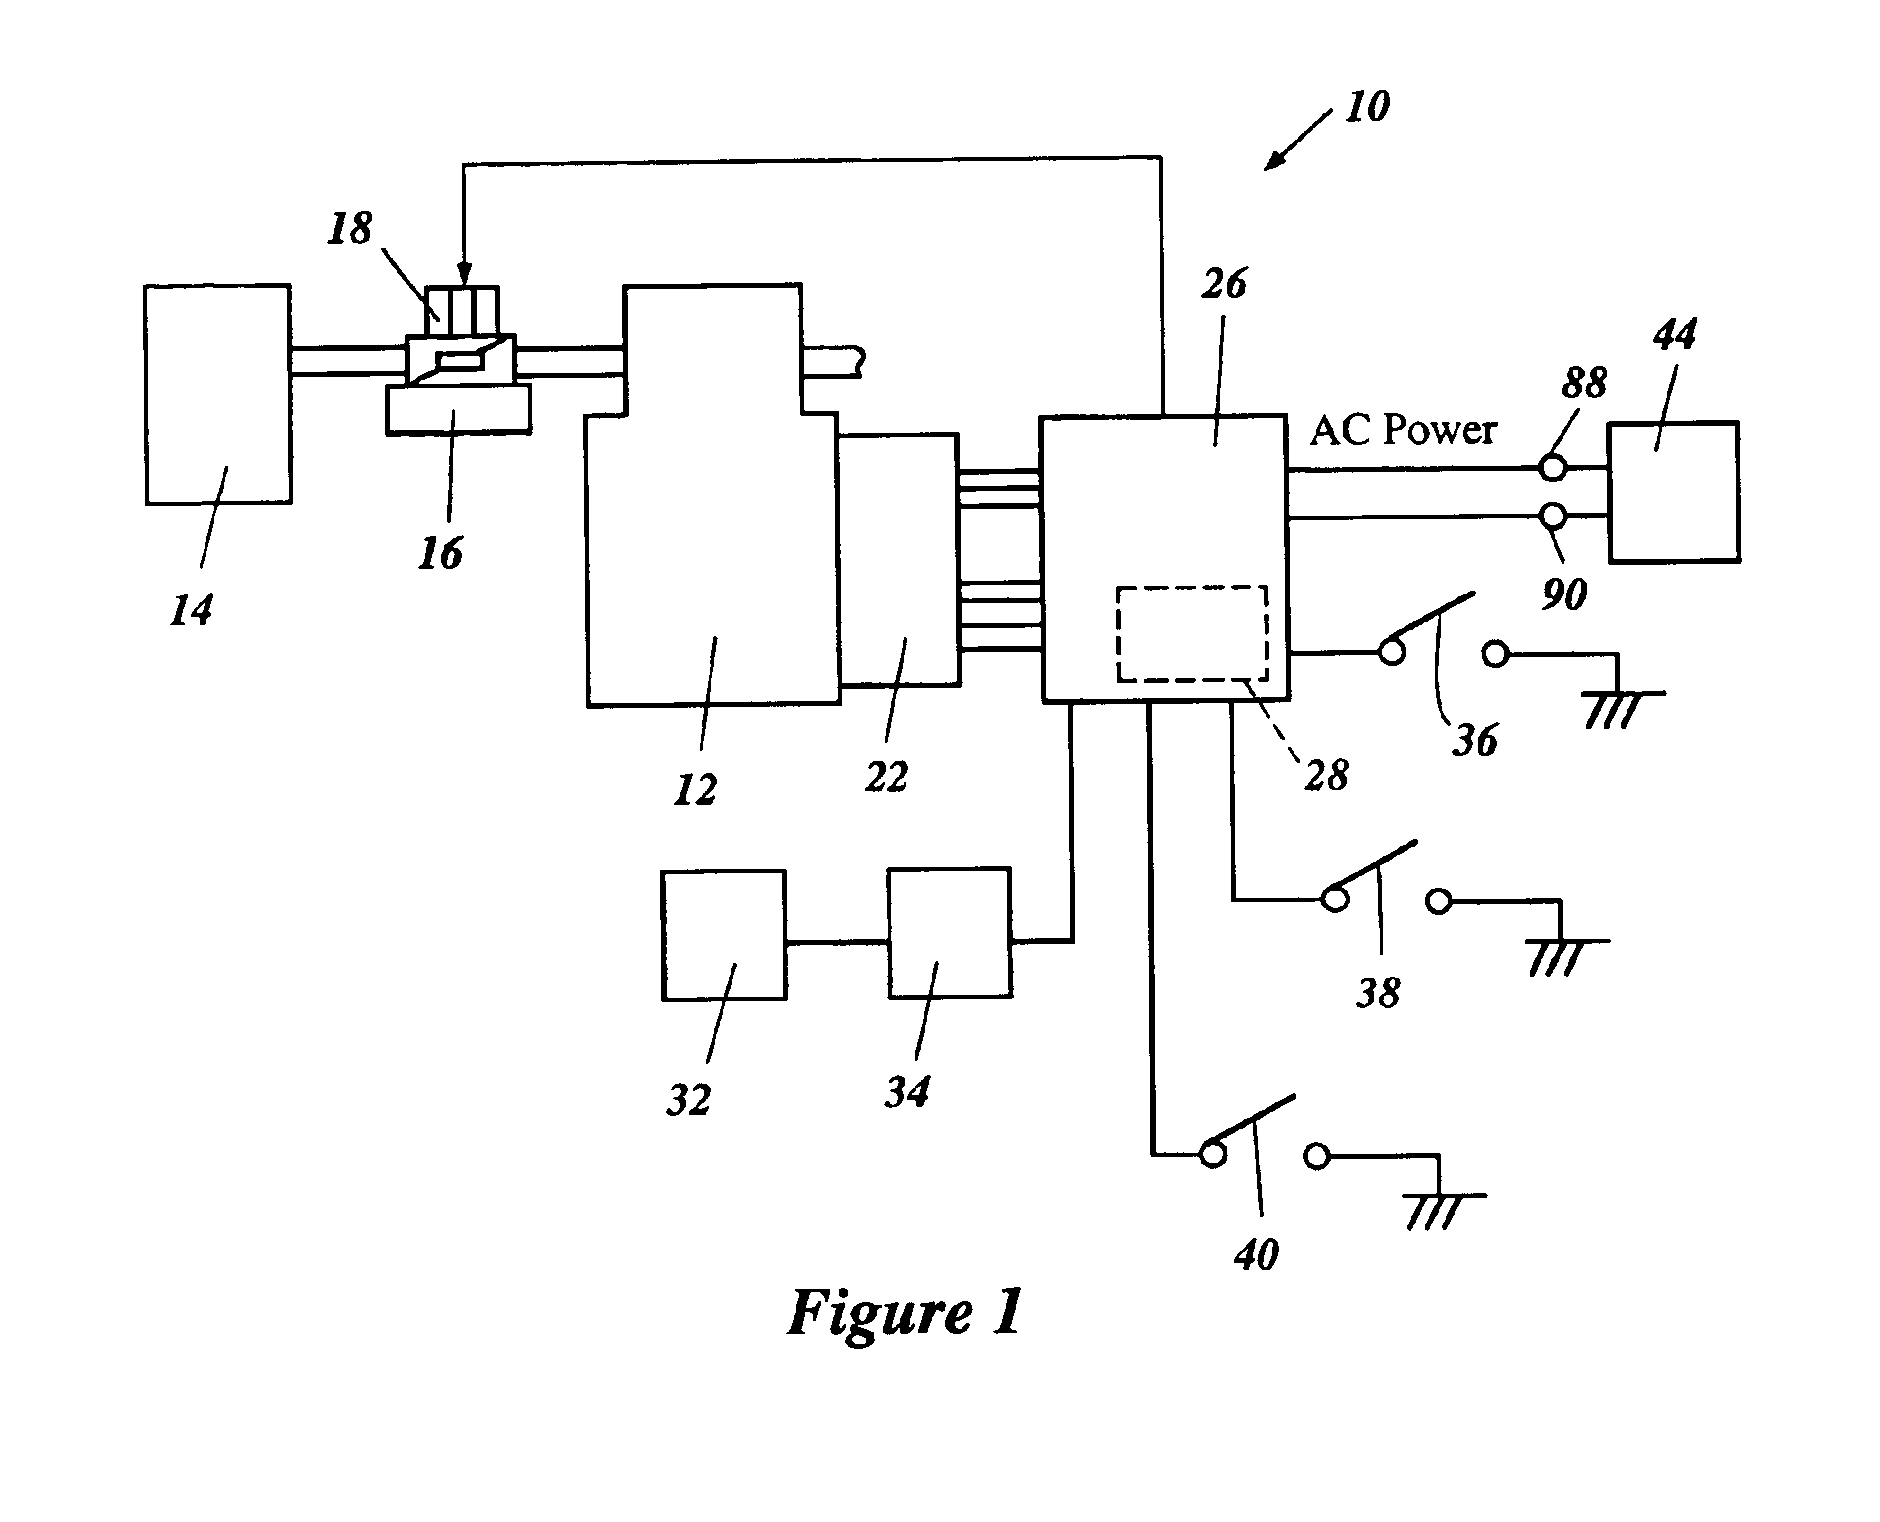 Portable power supply incorporating a generator driven by an engine